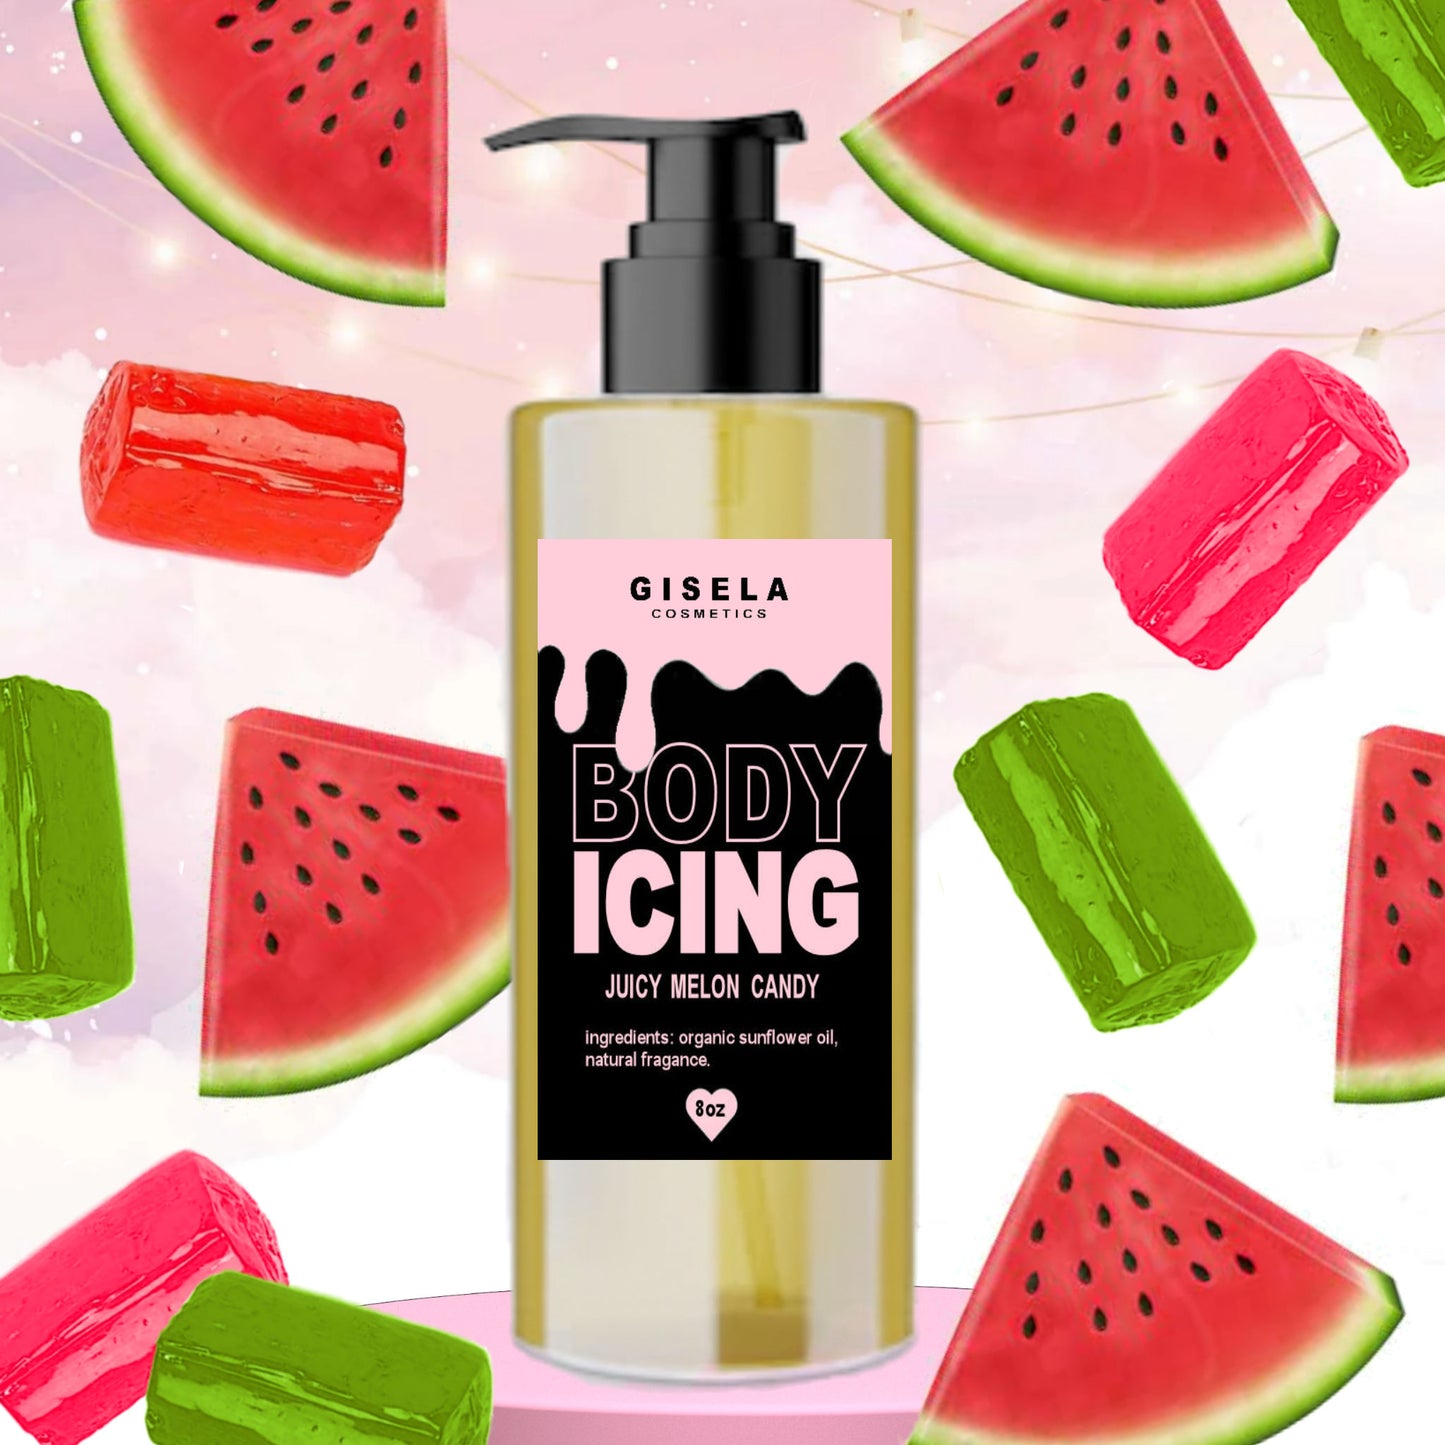 Juicy Melon Candy ┃ Body Icing